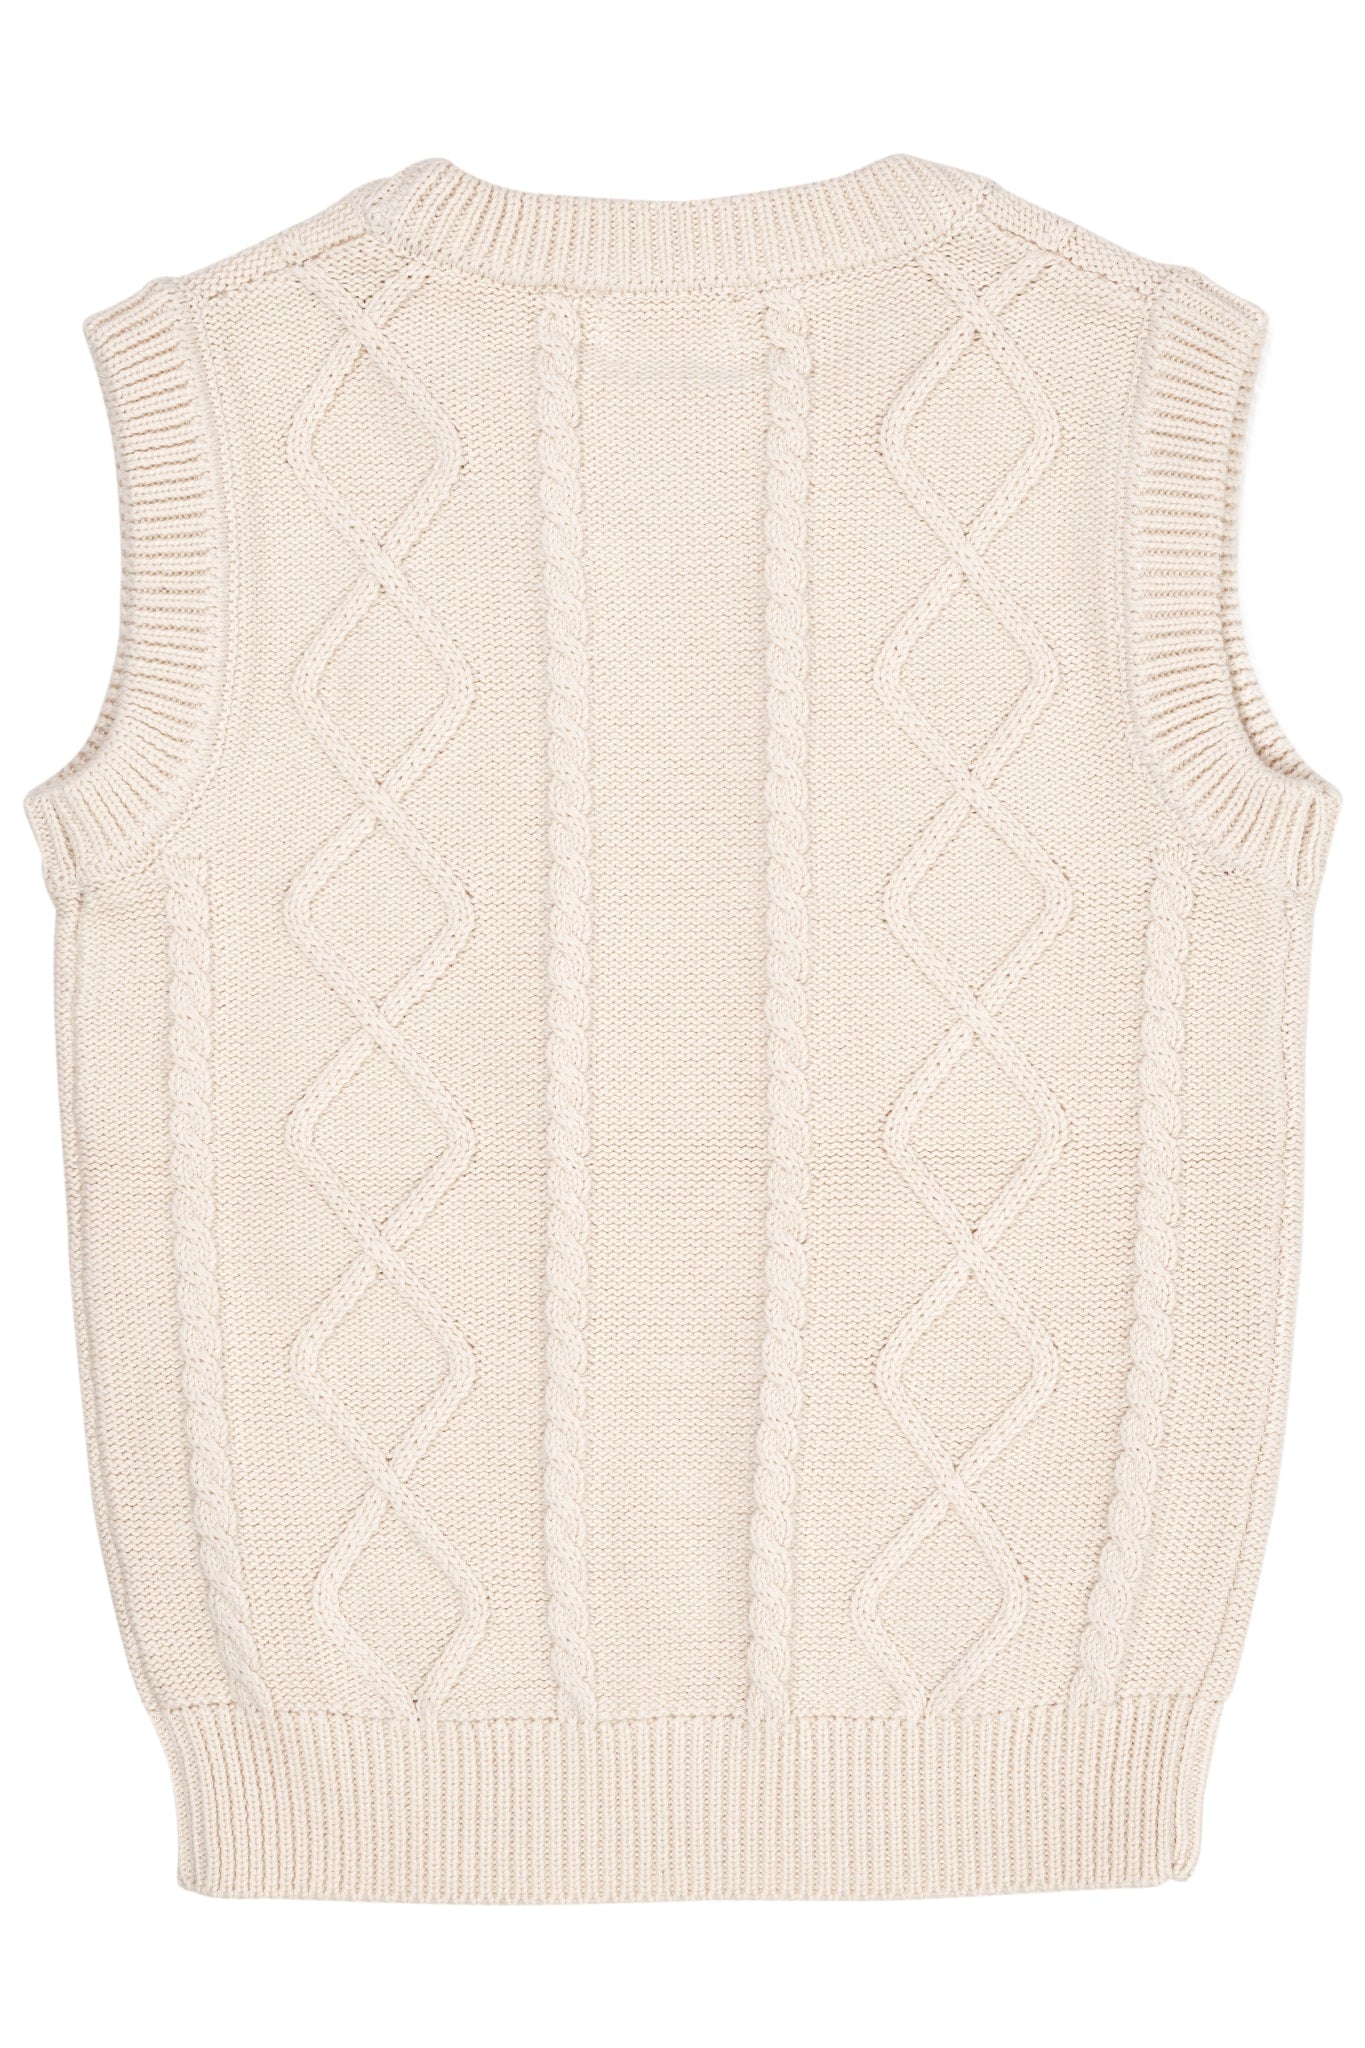 KNITTED CABLE VEST - CREAM